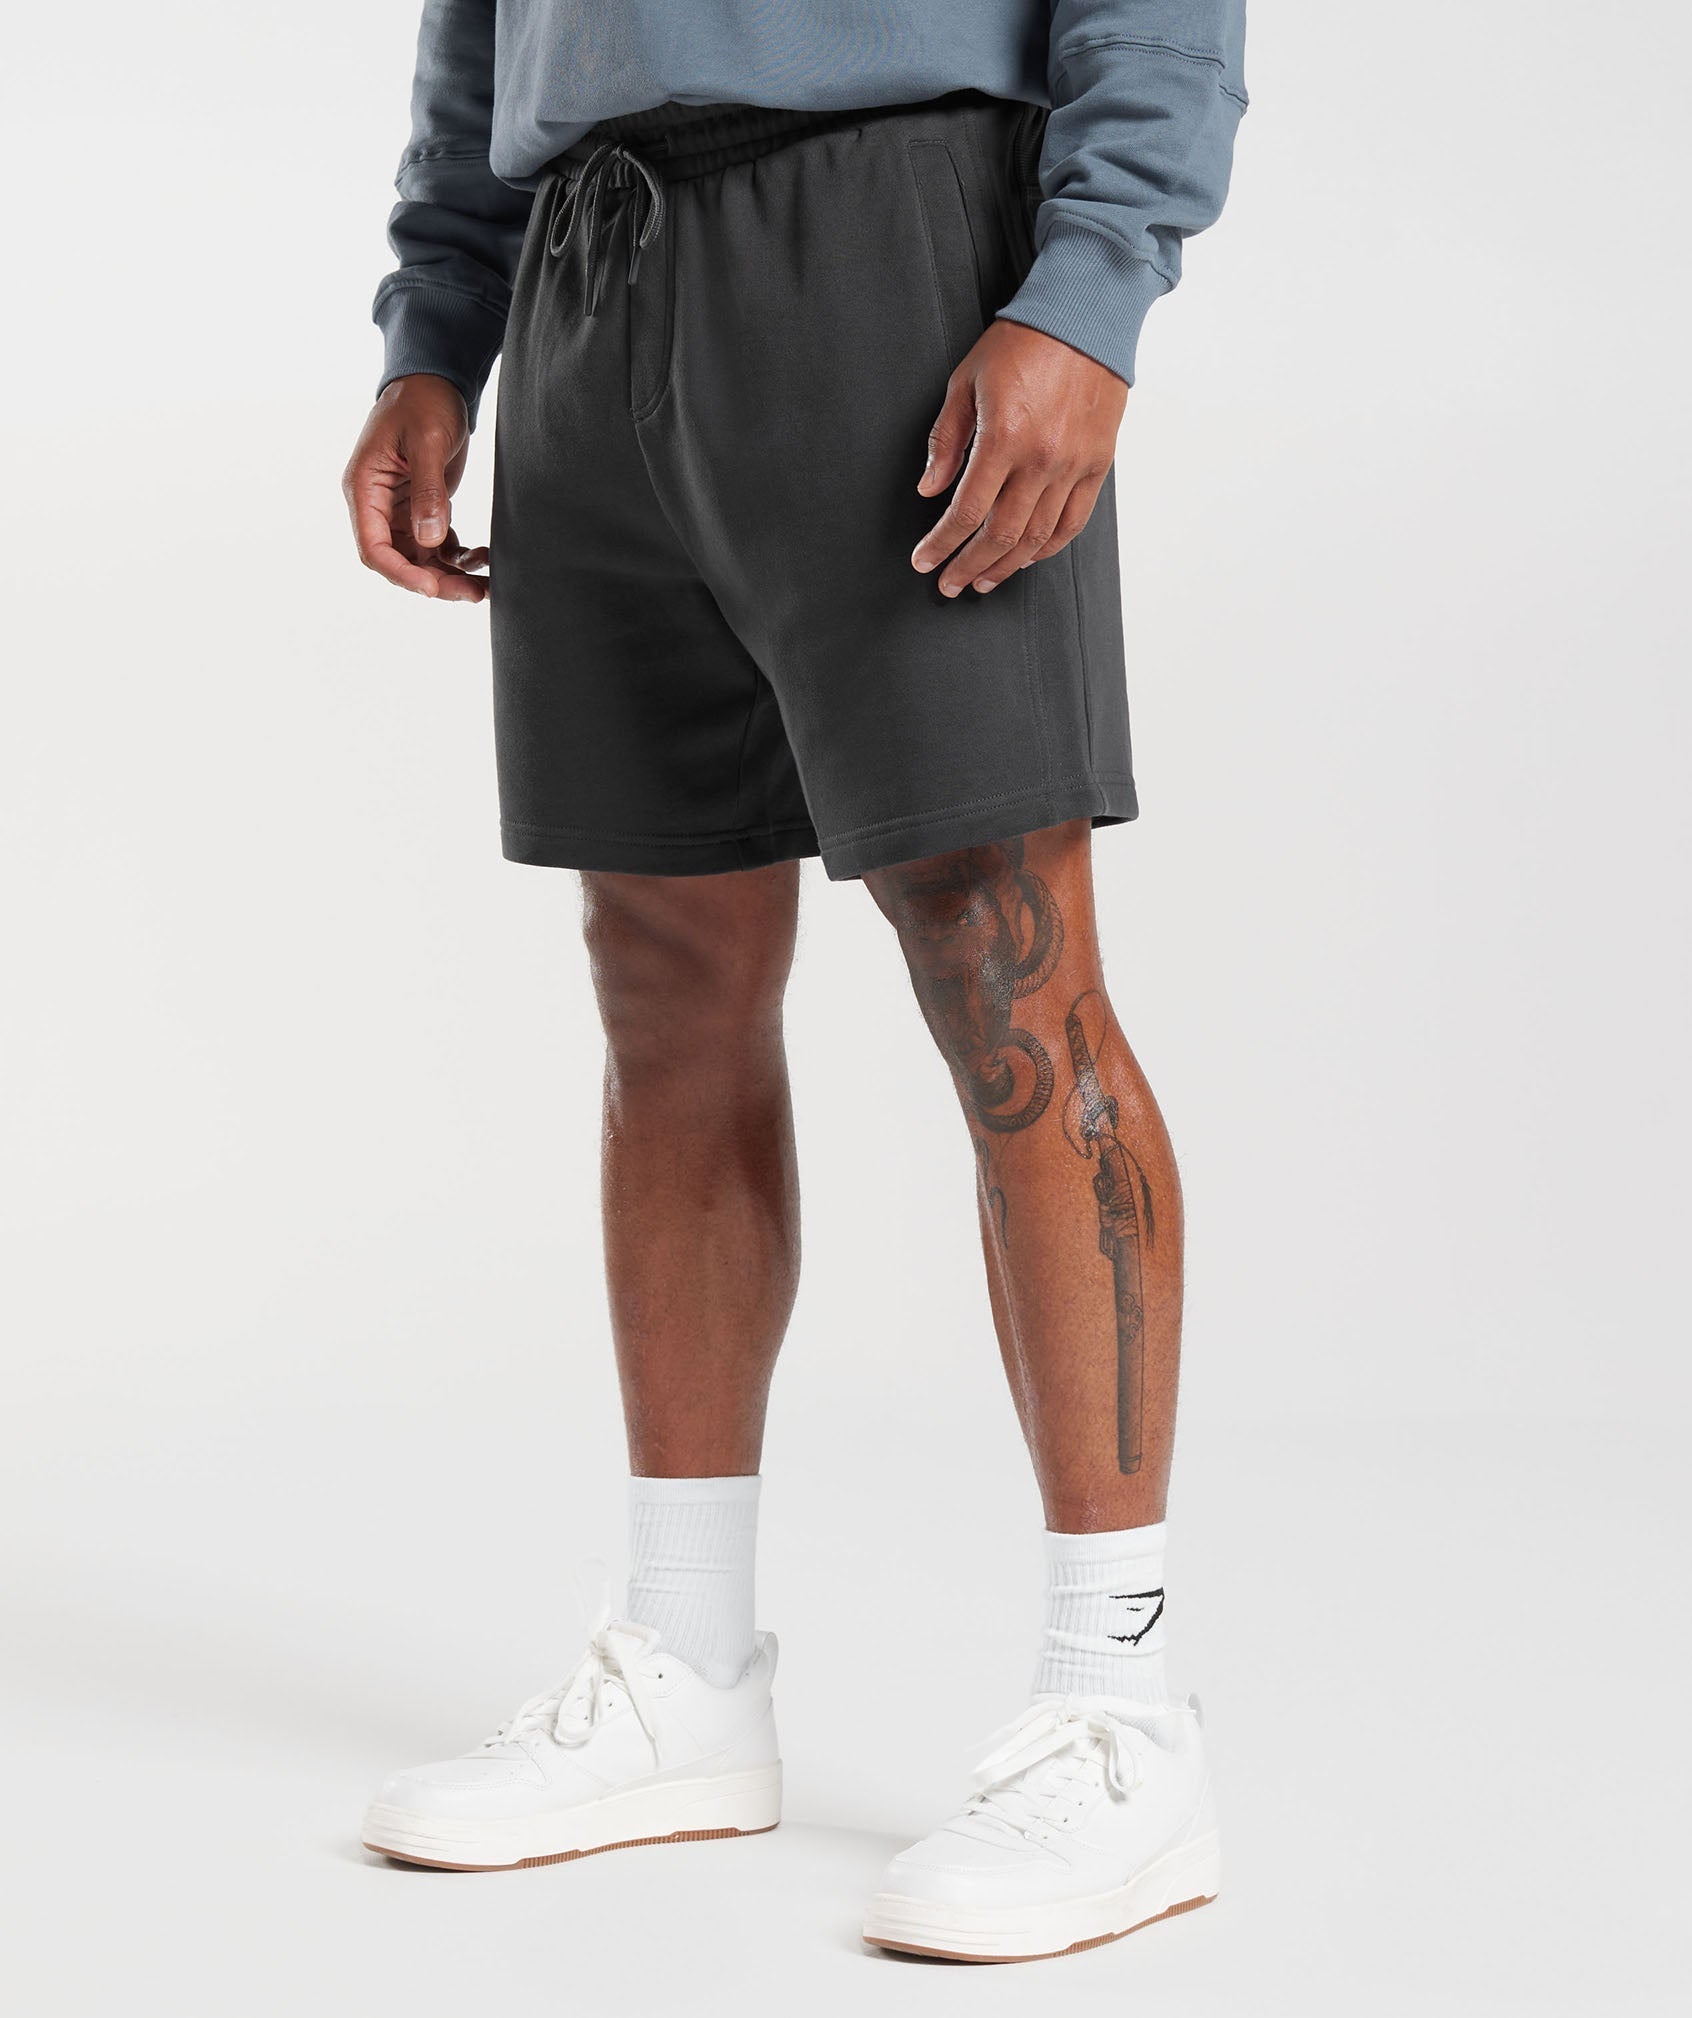 Rest Day Essentials 7" Shorts in Onyx Grey - view 3